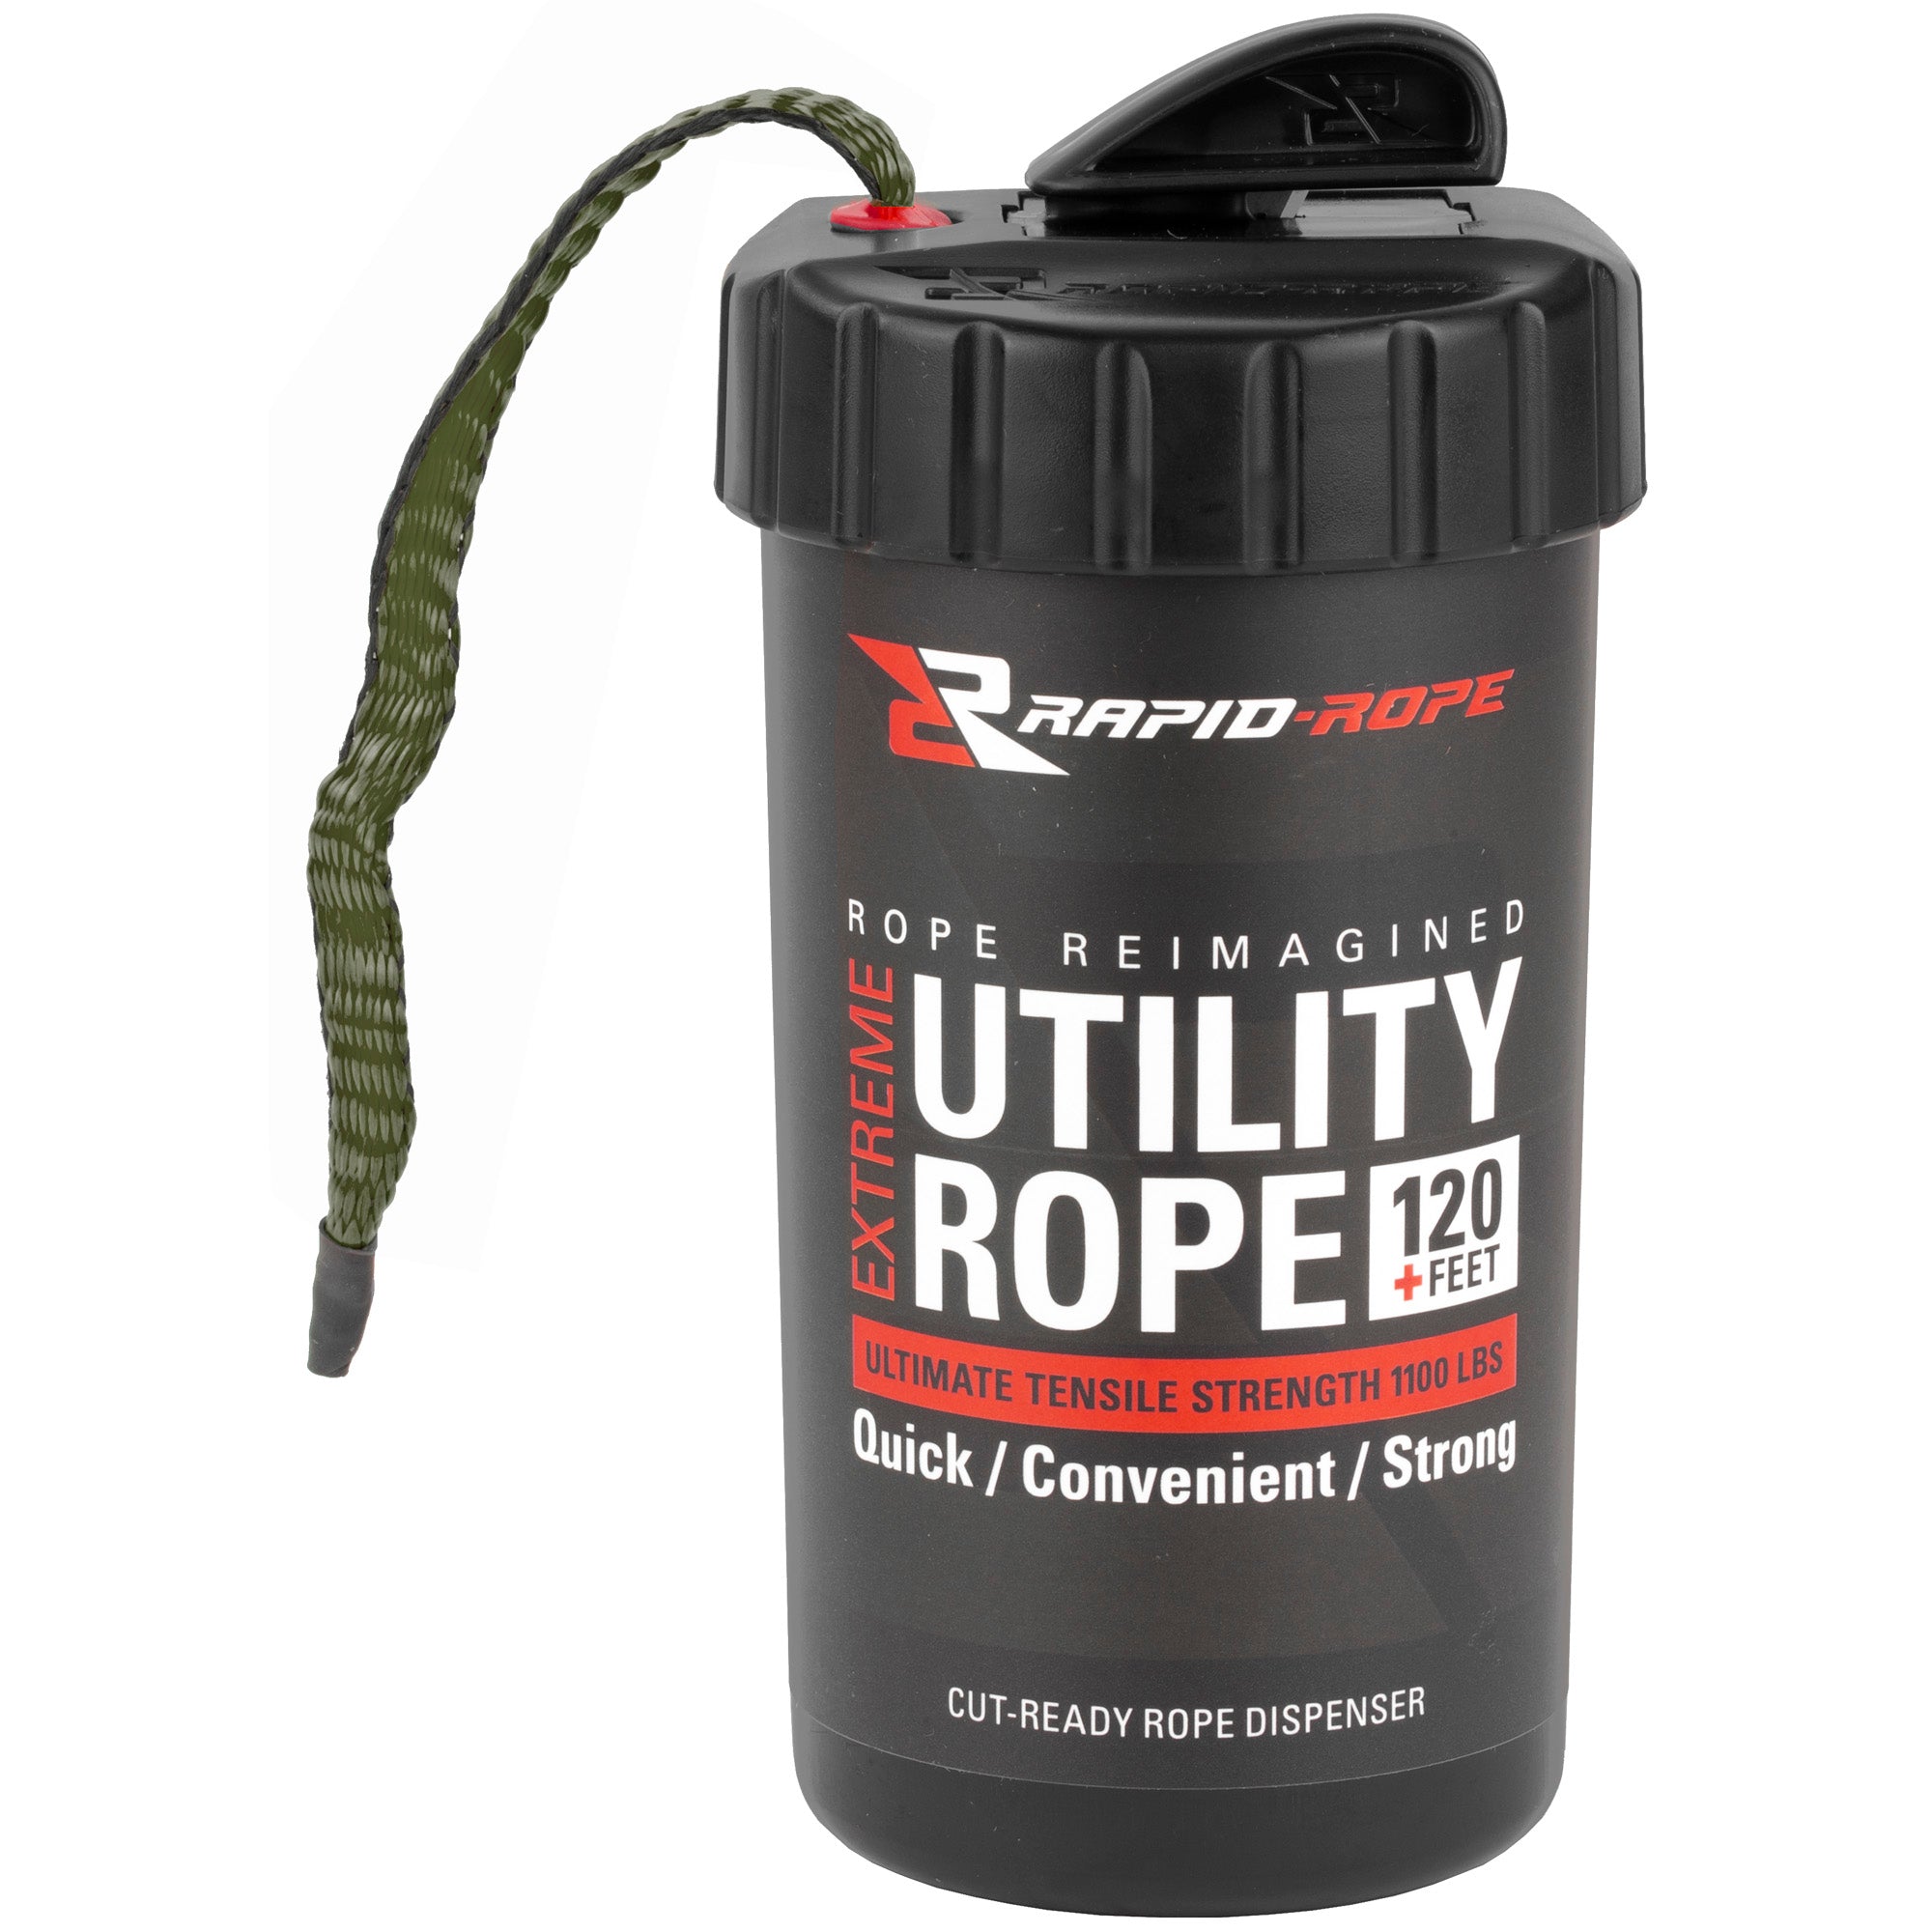 Rapid Rope Canister OD Green, Rope In a Can, 120 Feet, Rated For 1100 lbs, Built-In Rope Cutter, OD Green